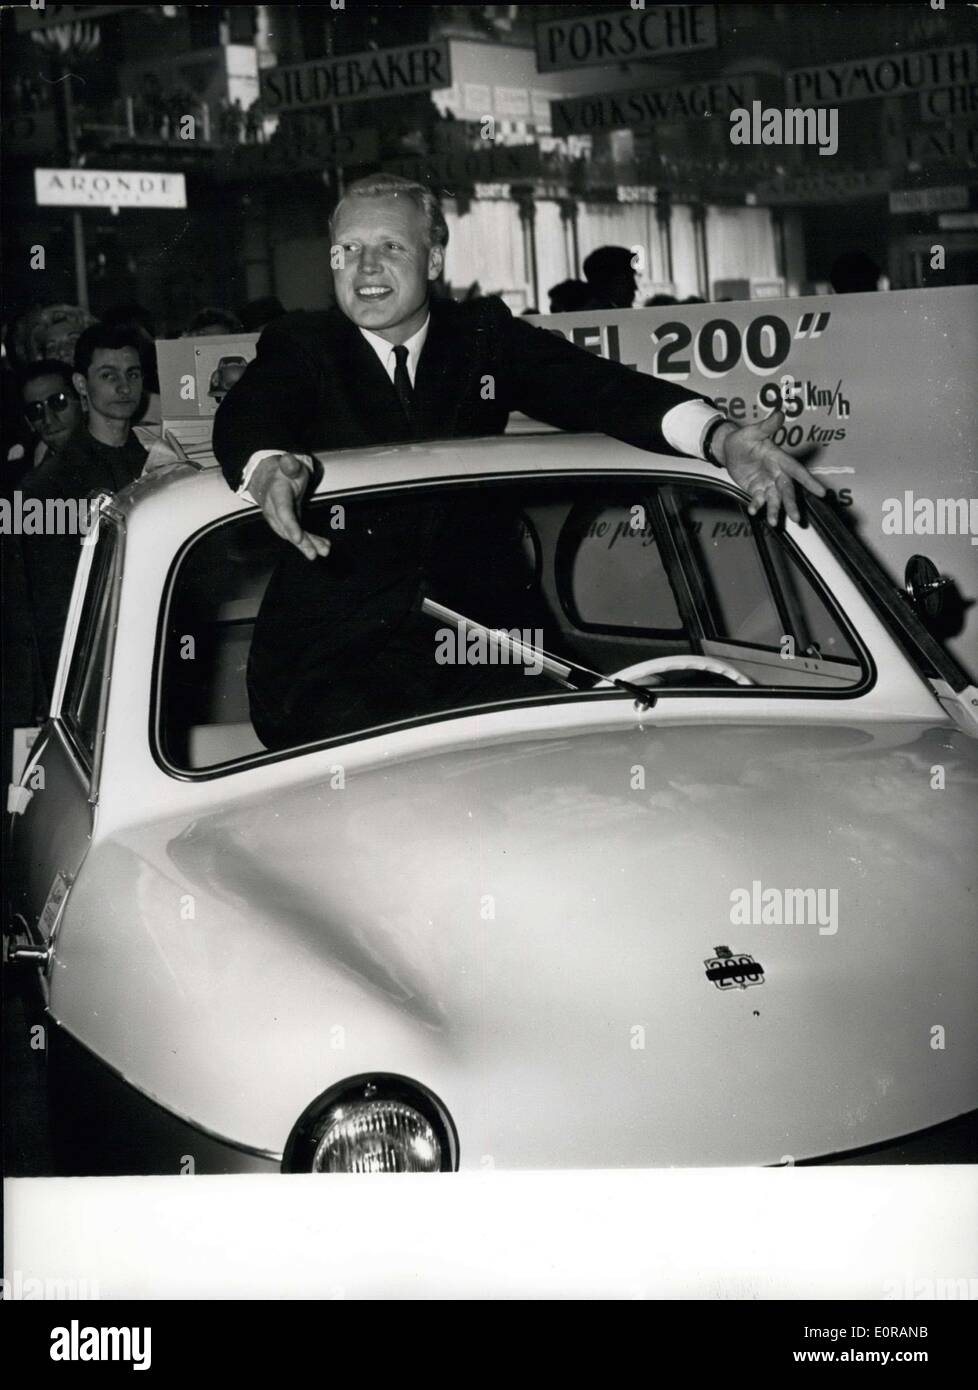 Oct. 06, 1958 - Mike Hawthorn As Technical Director Of York Noble Industries: The famous english racer, Mike Hawthorn has accepted the post of the technical director of the York noble industries Ltd. Photo shows. Mike Hawthorn seated on the Nobel 200 at the Paris motor show this afternoon. Stock Photo